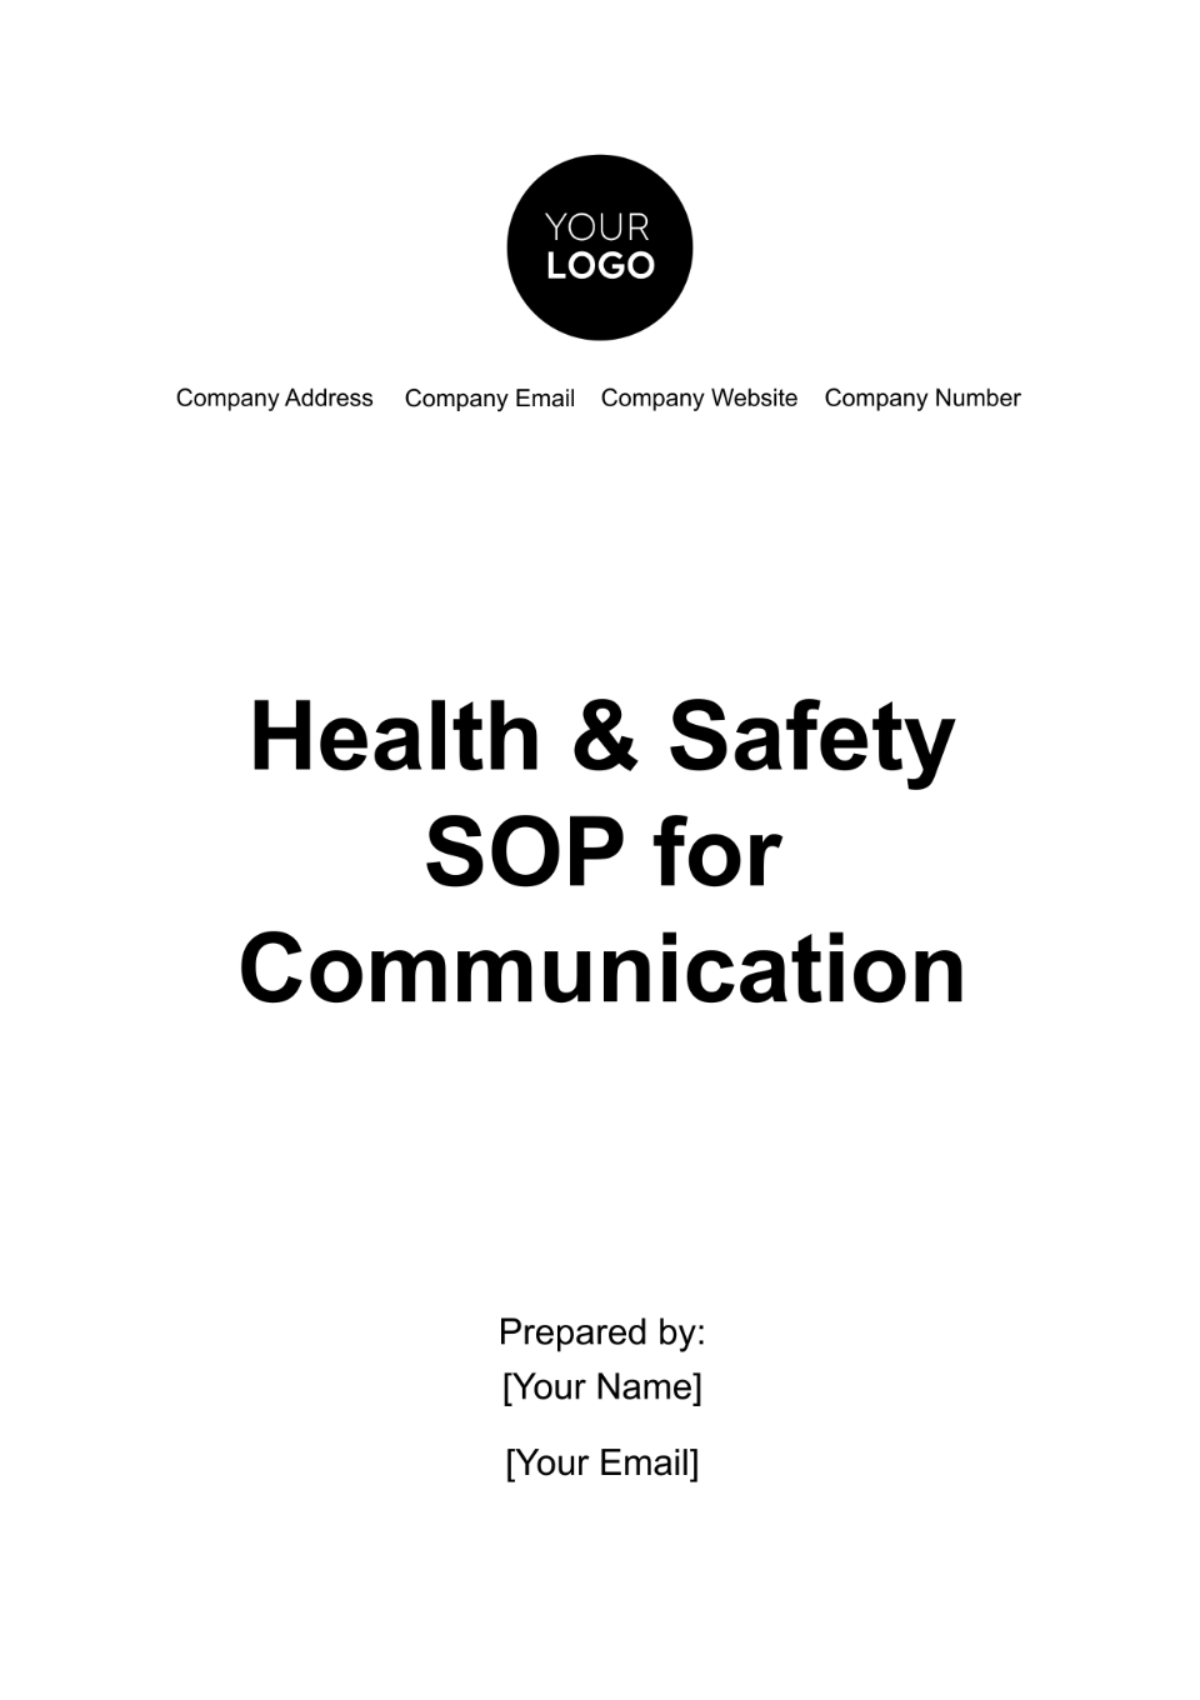 Health & Safety SOP for Communication Template